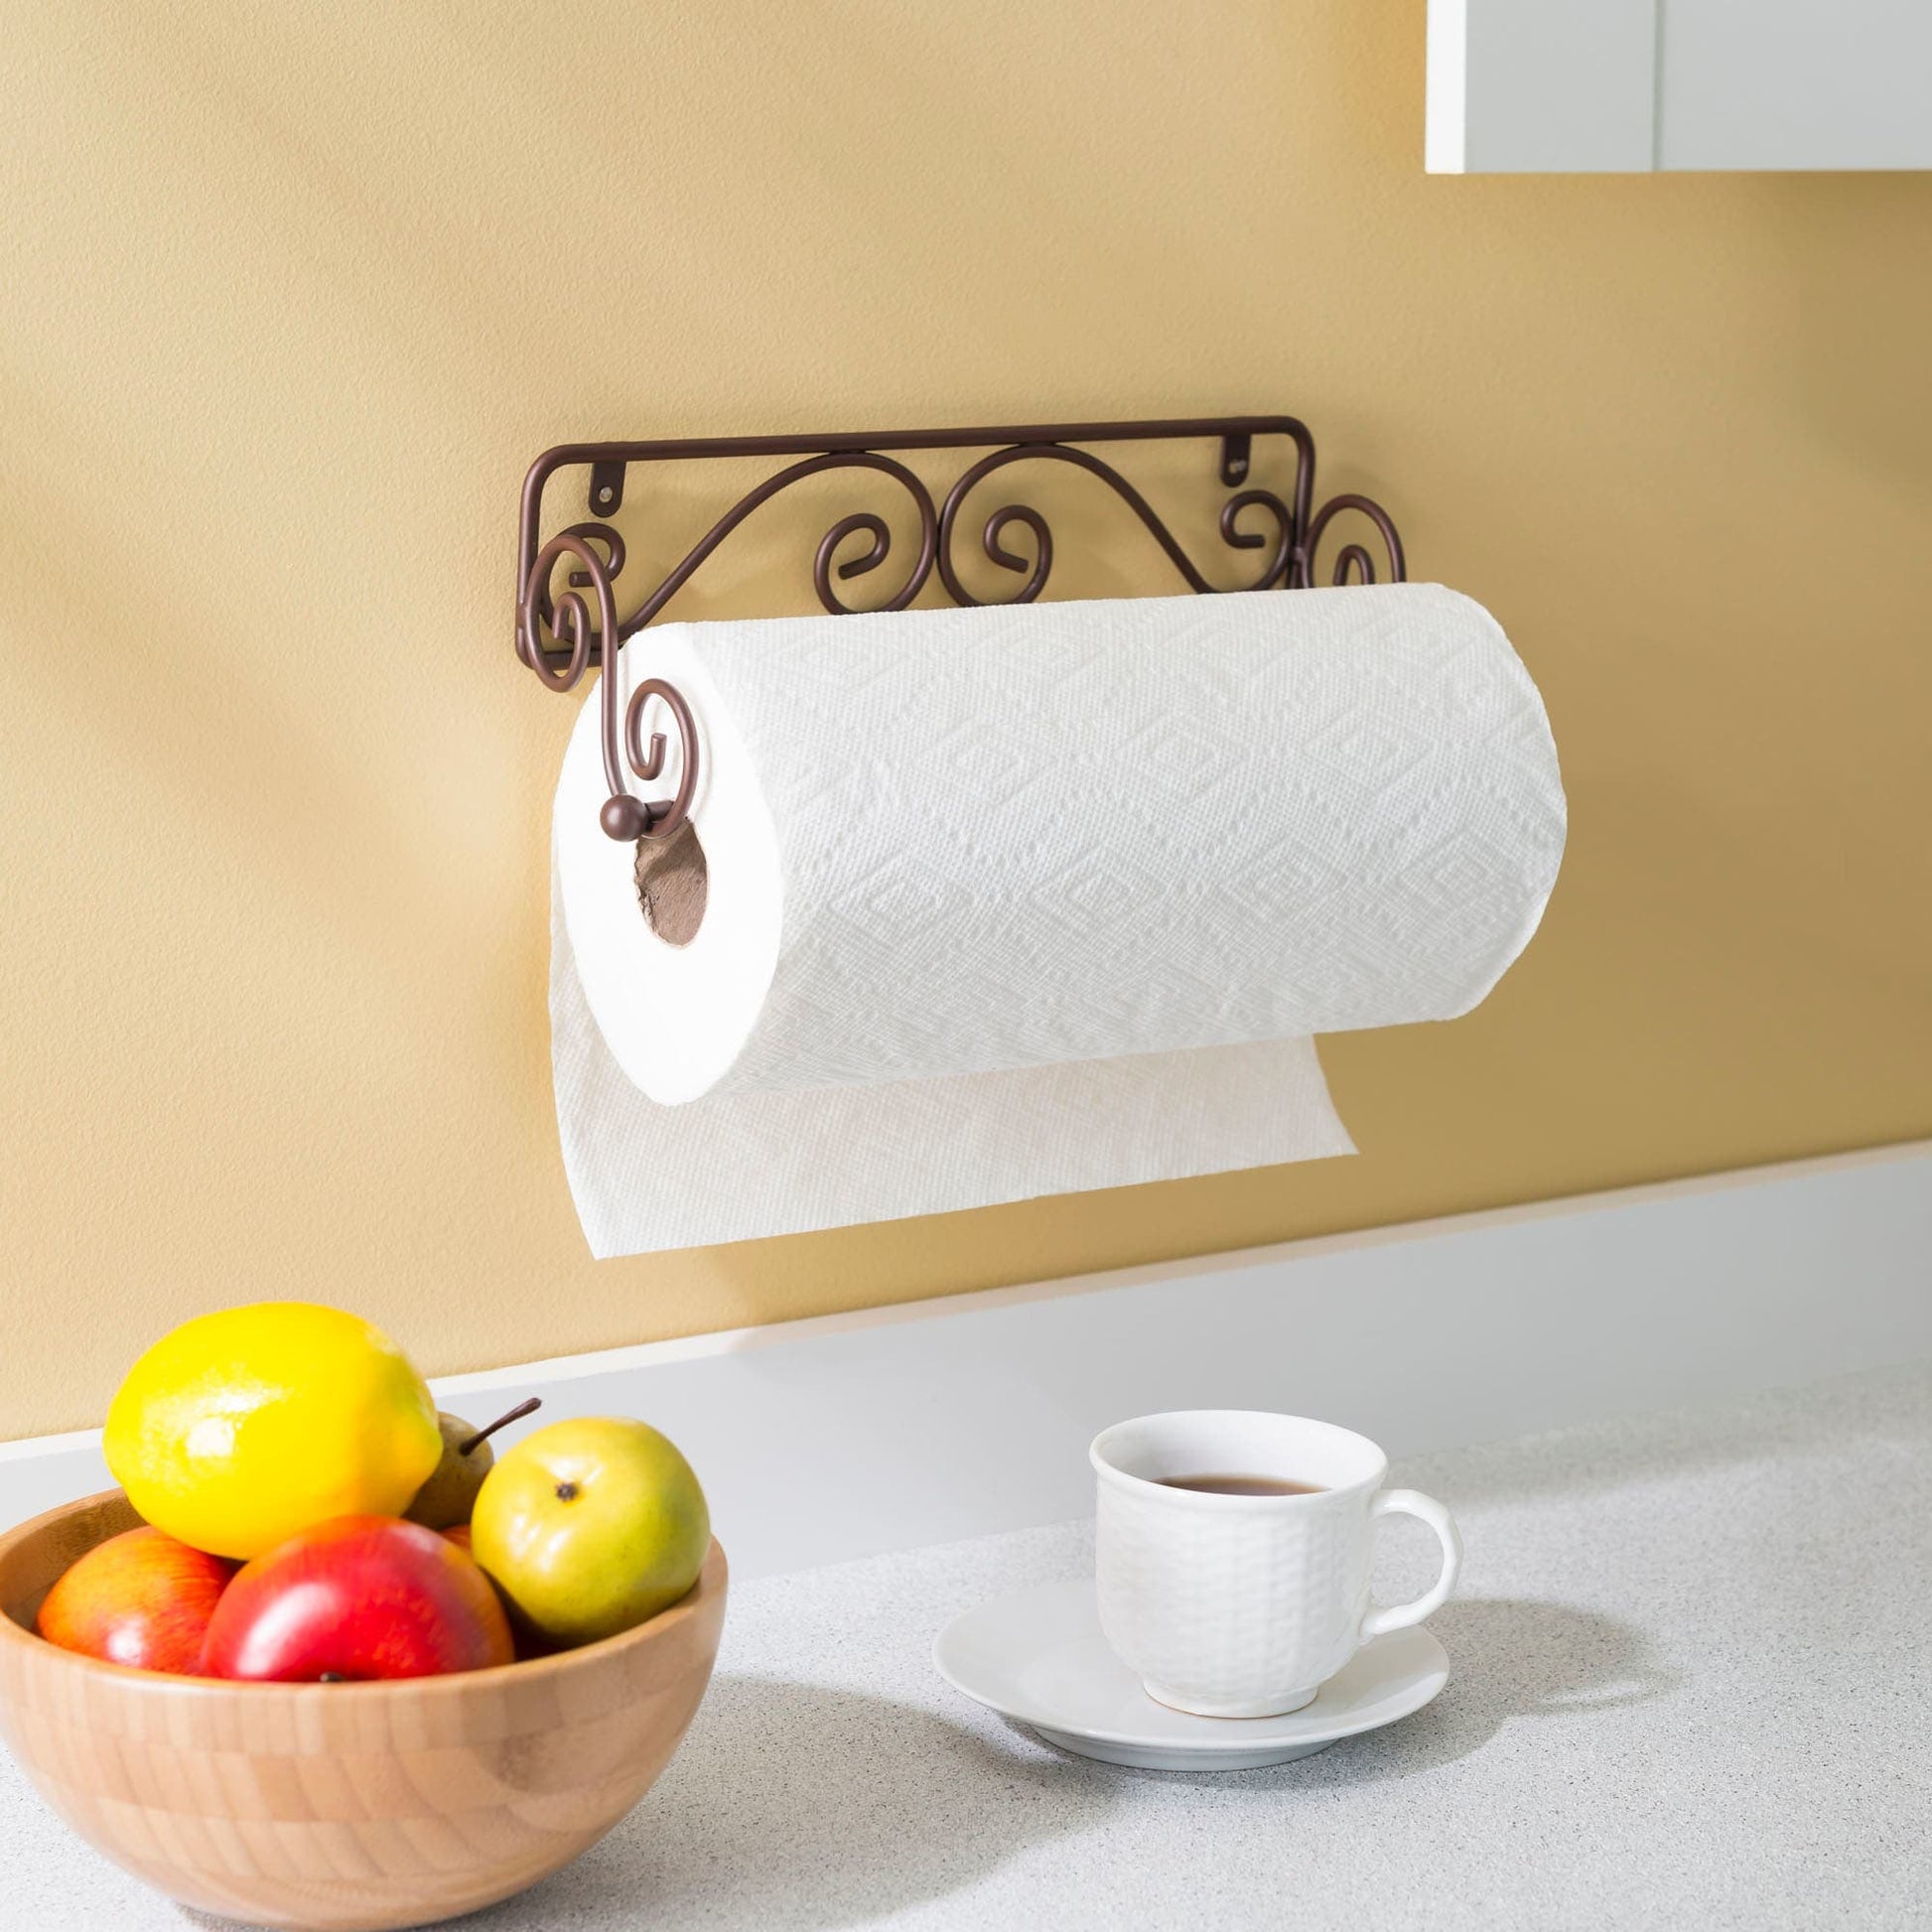 Home Basics Scroll Collection Steel Wall Mounted Paper Towel Holder, Bronze